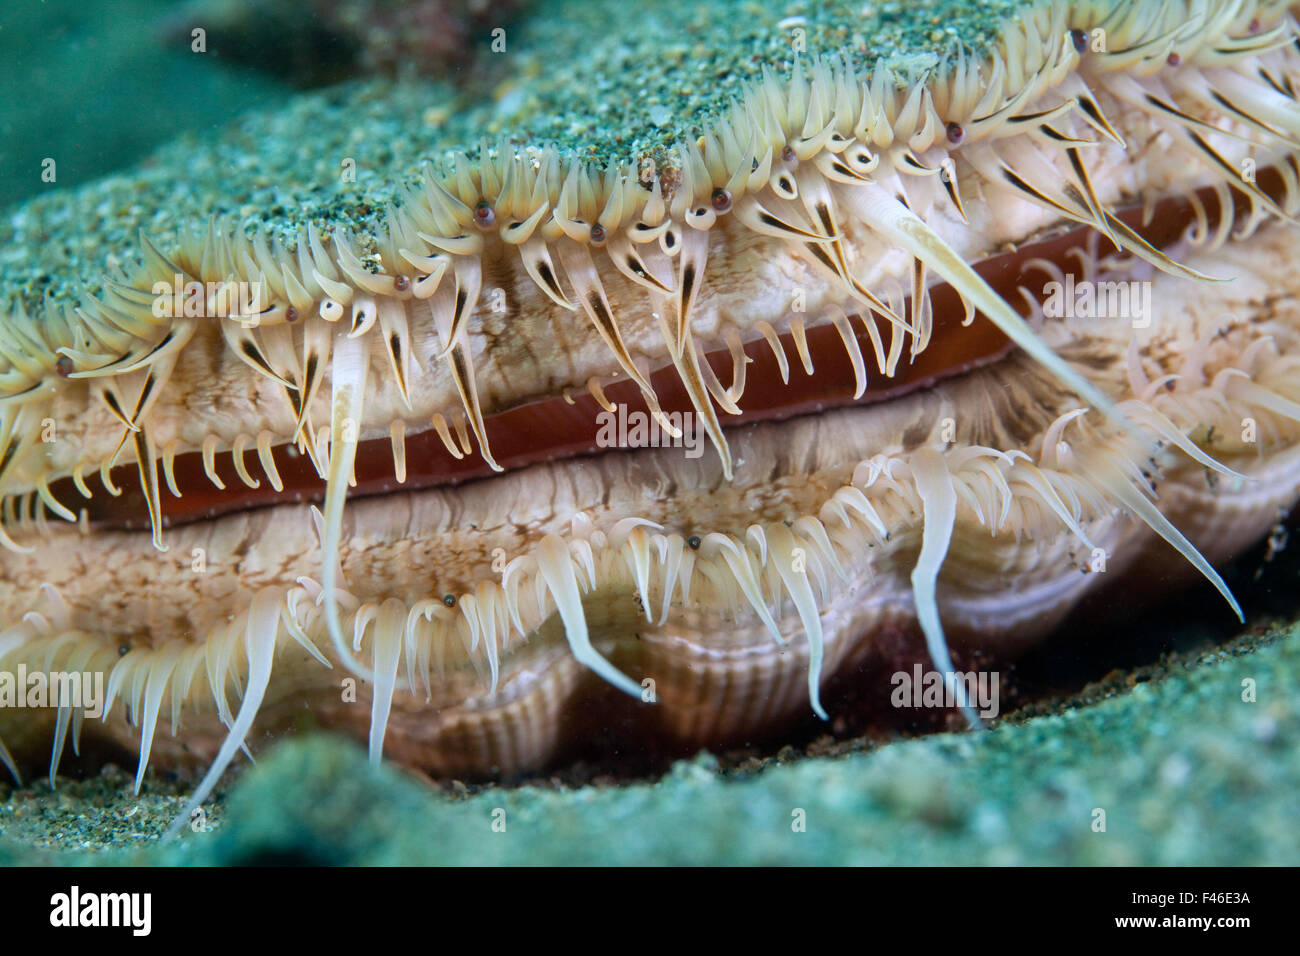 Giant scallop (Pecten maximus) close up detail, Channel Islands, UK June Highly commended in the category of Close to Nature Category of the BWPA Competition 2014. Stock Photo